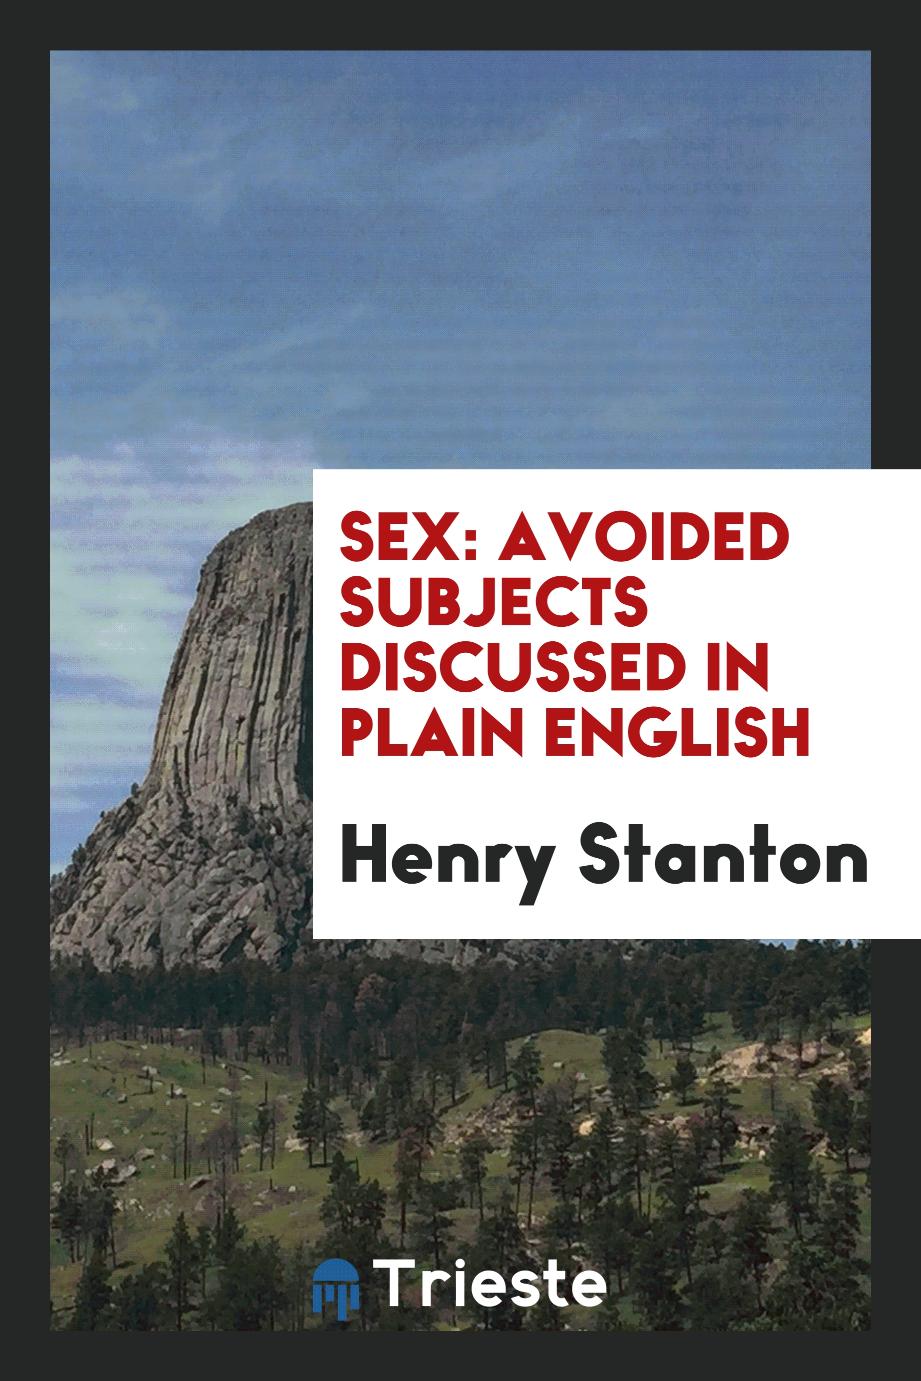 Sex: Avoided Subjects Discussed in Plain English